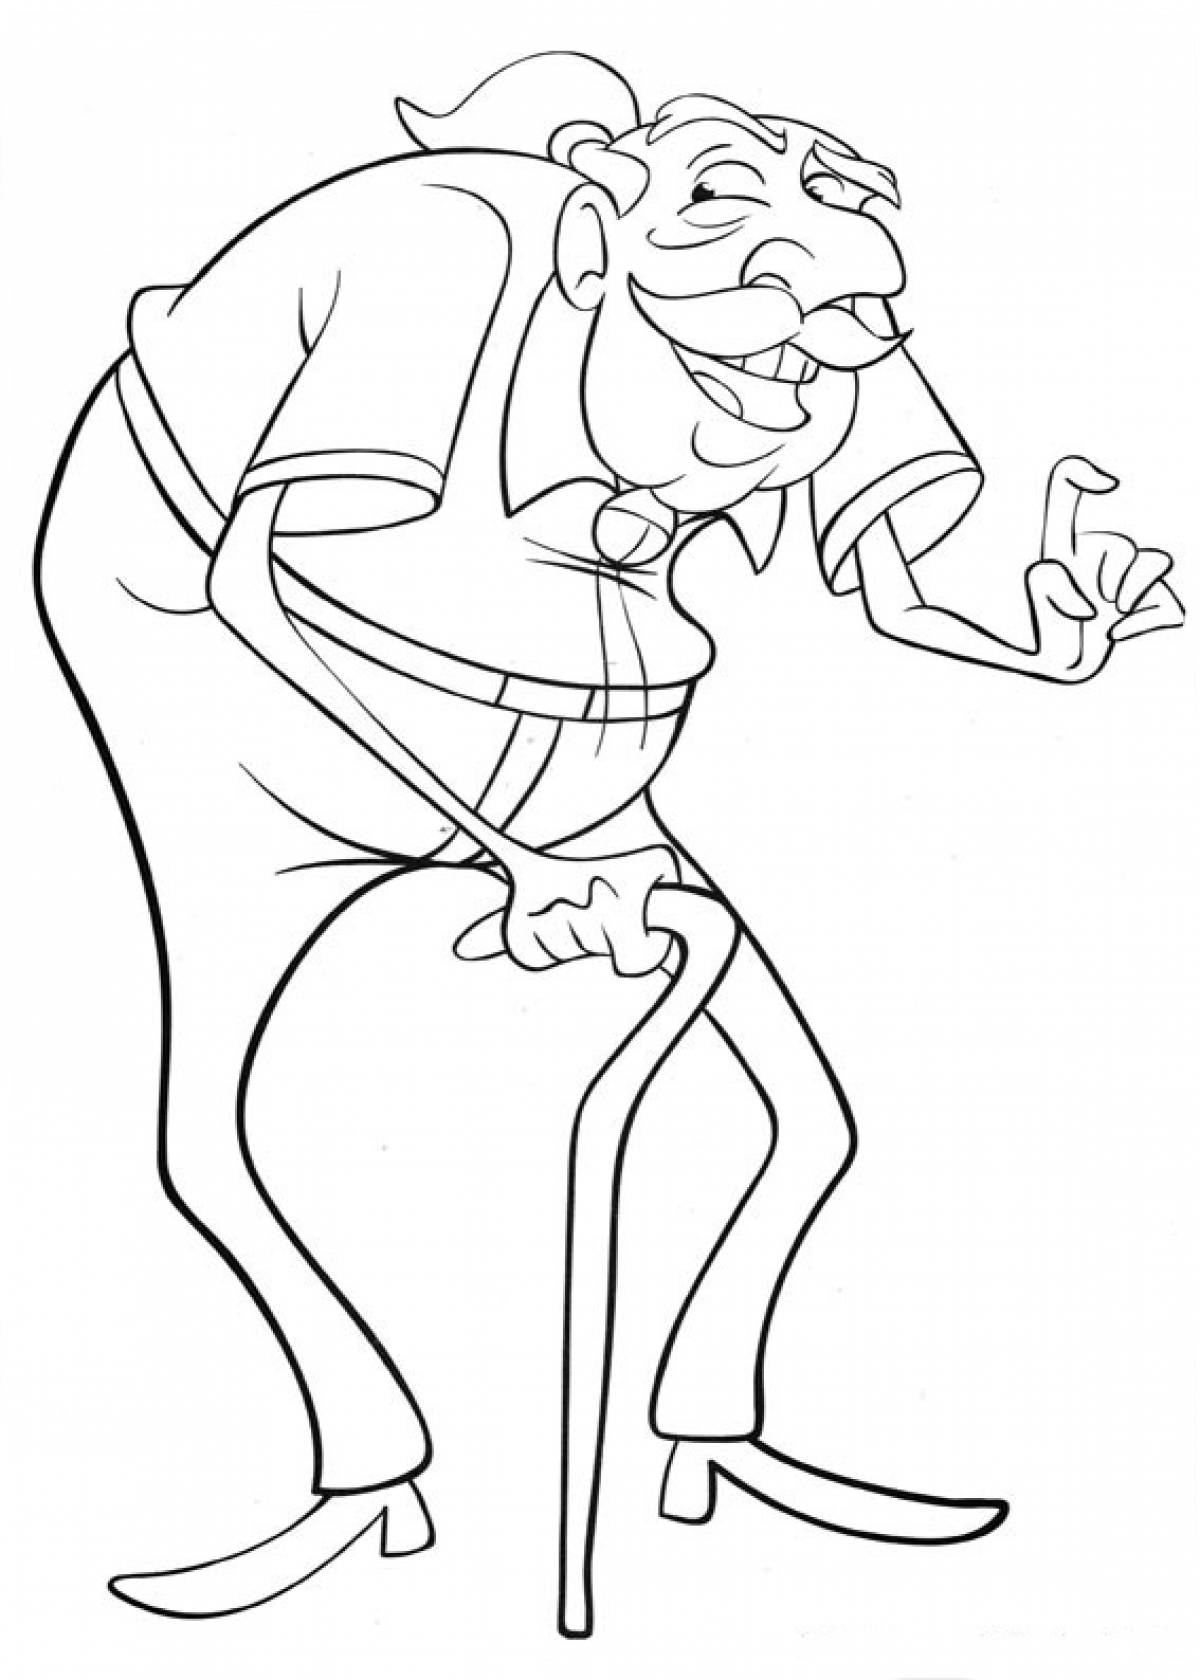 Curious george coloring page